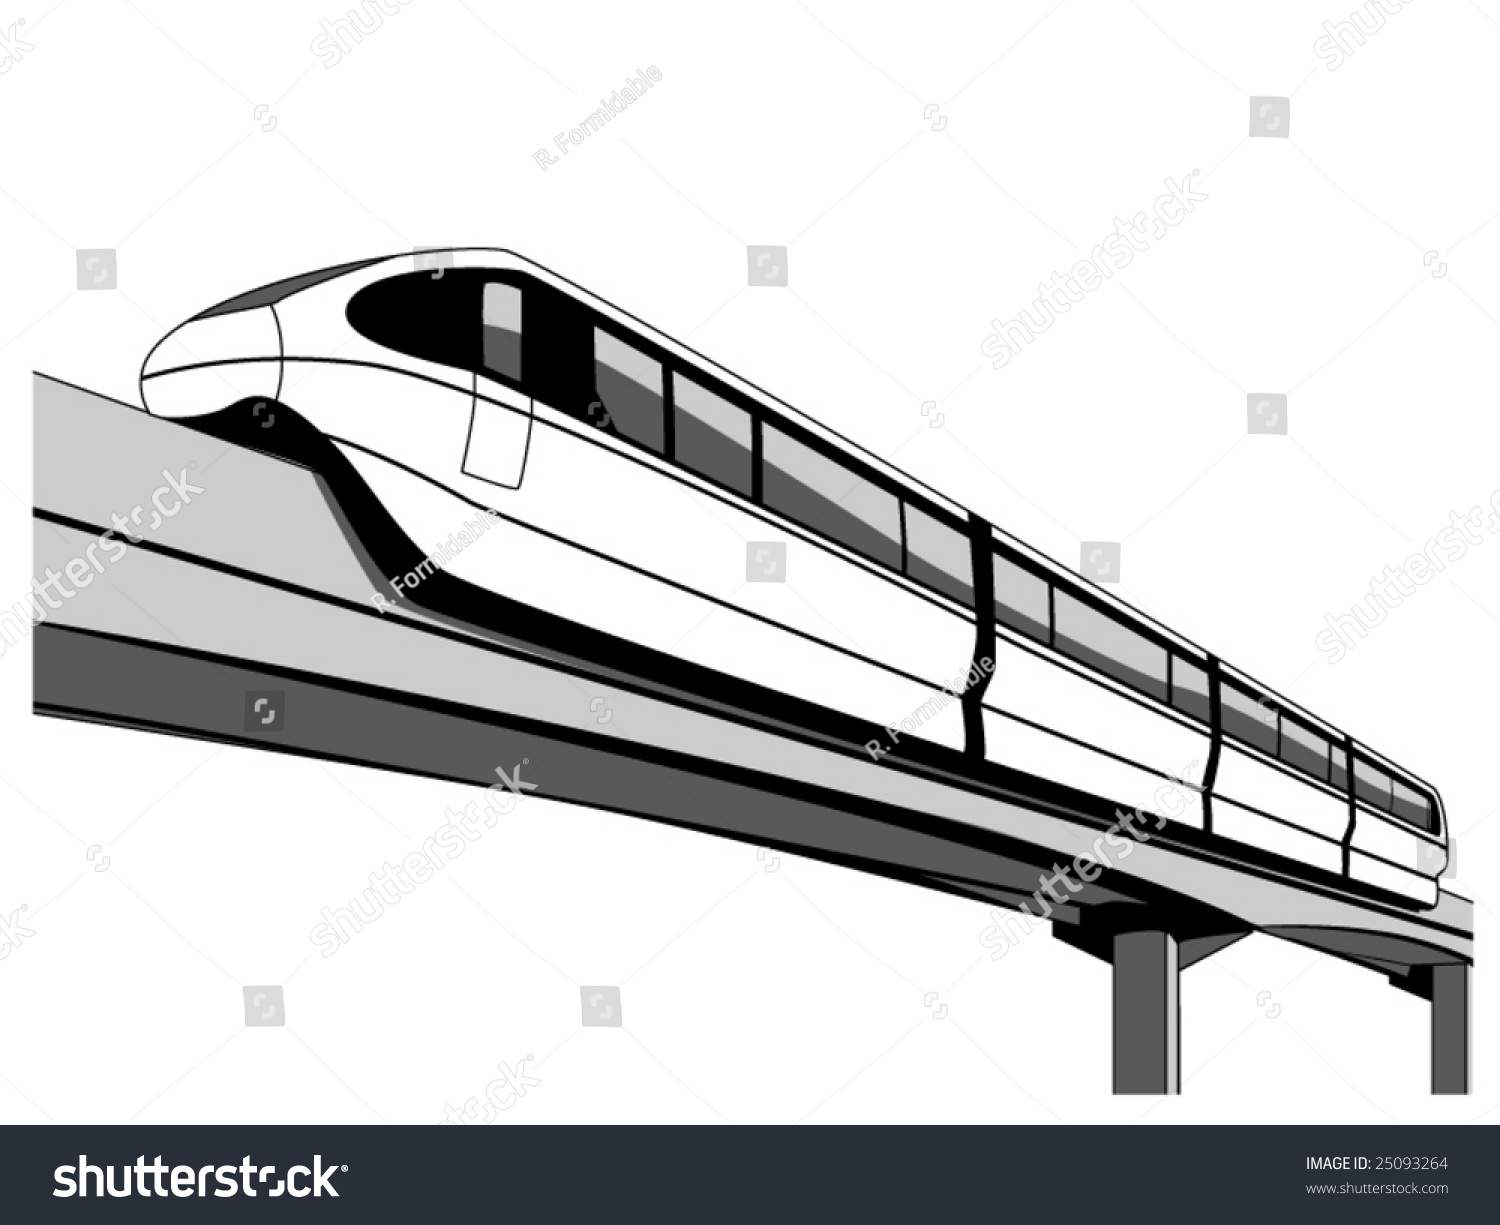 Vector Illustration Of A Monorail - 25093264 : Shutterstock